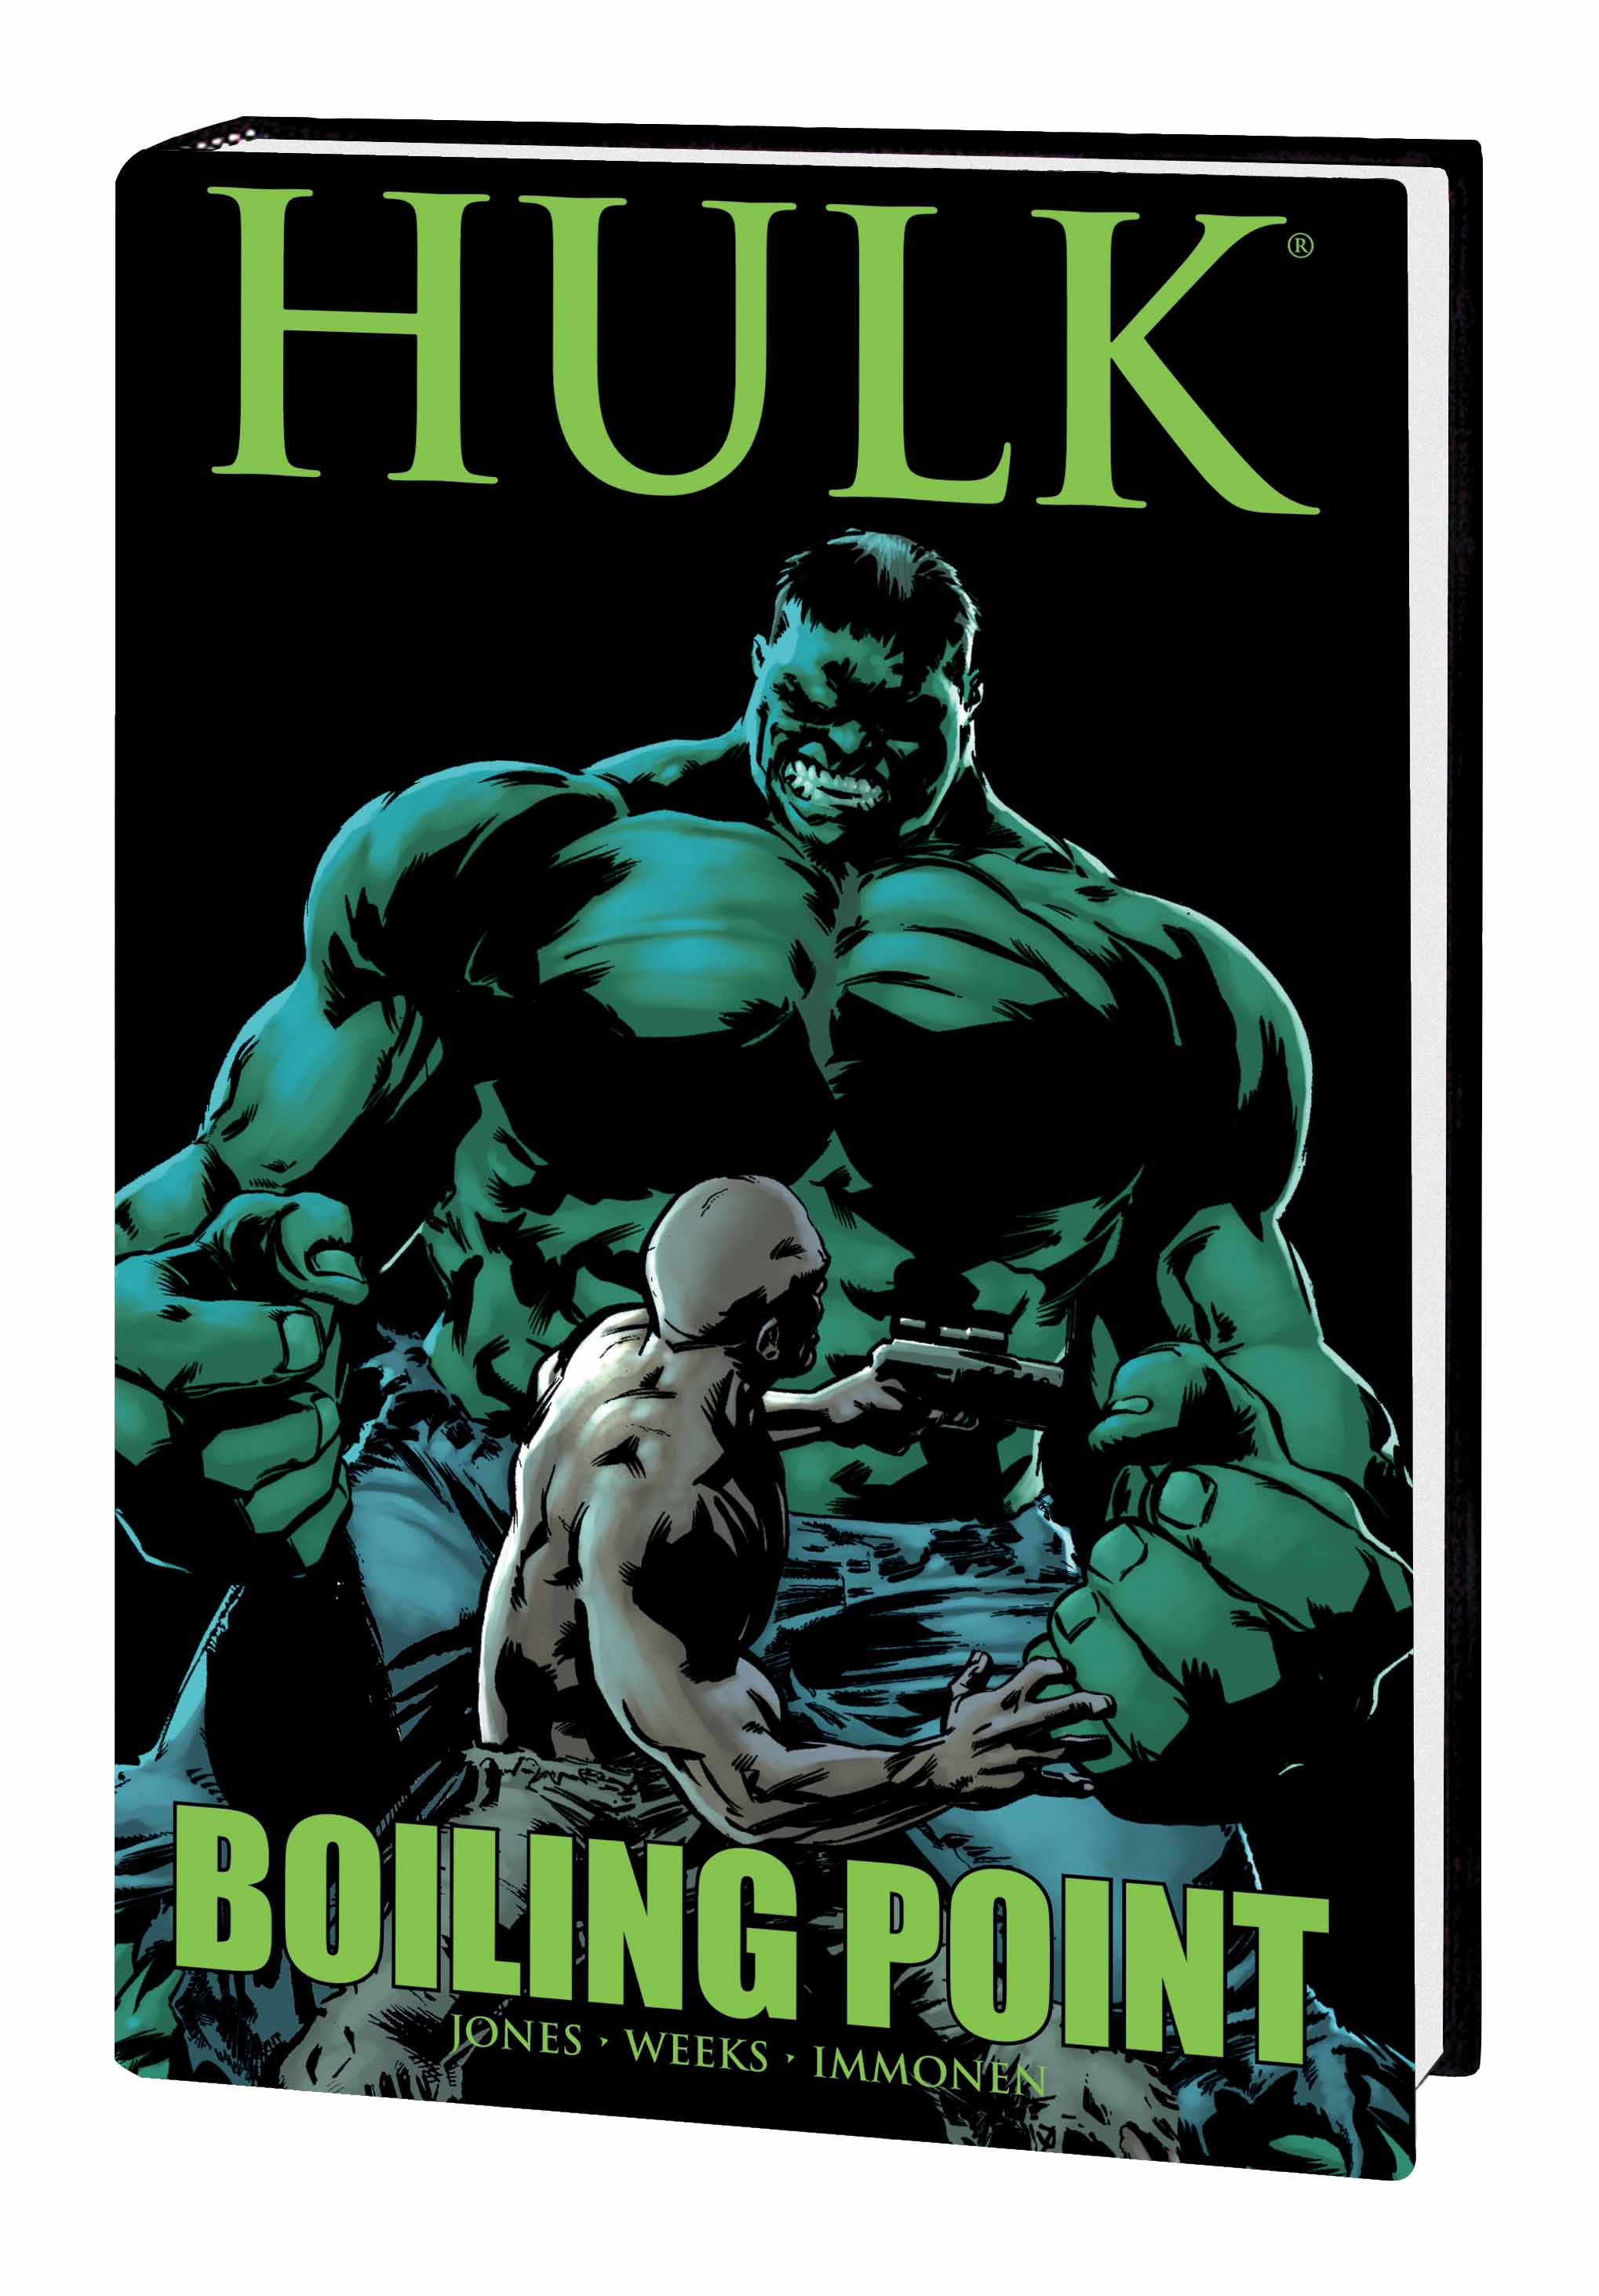 Hulk: Boiling Point Premiere HC (Hardcover)